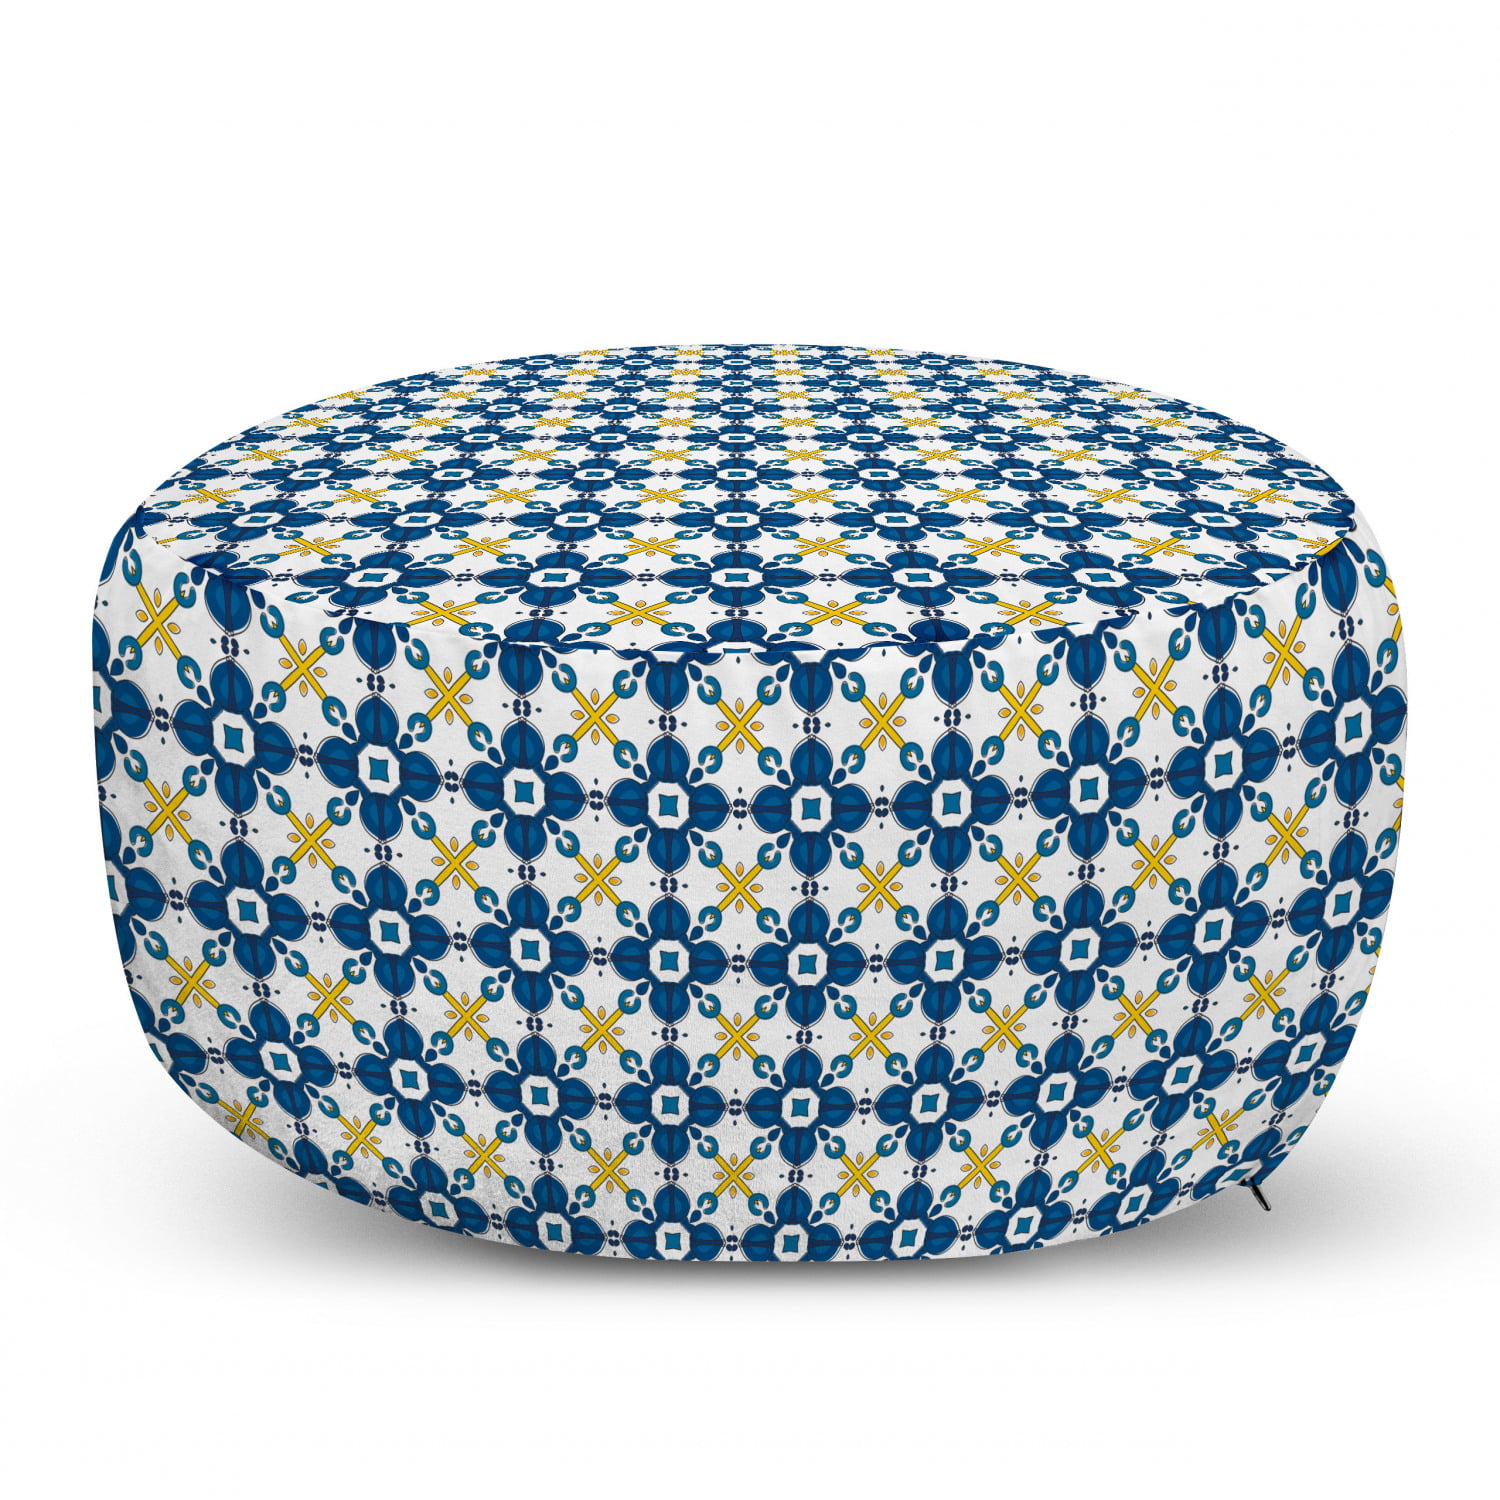 Grey Pale Grey White 25 Ambesonne Anchor Rectangle Pouf Simple with Ocean Inspired Wave Pattern Oceanic Sea Life Under Desk Foot Stool for Living Room Office Ottoman with Cover